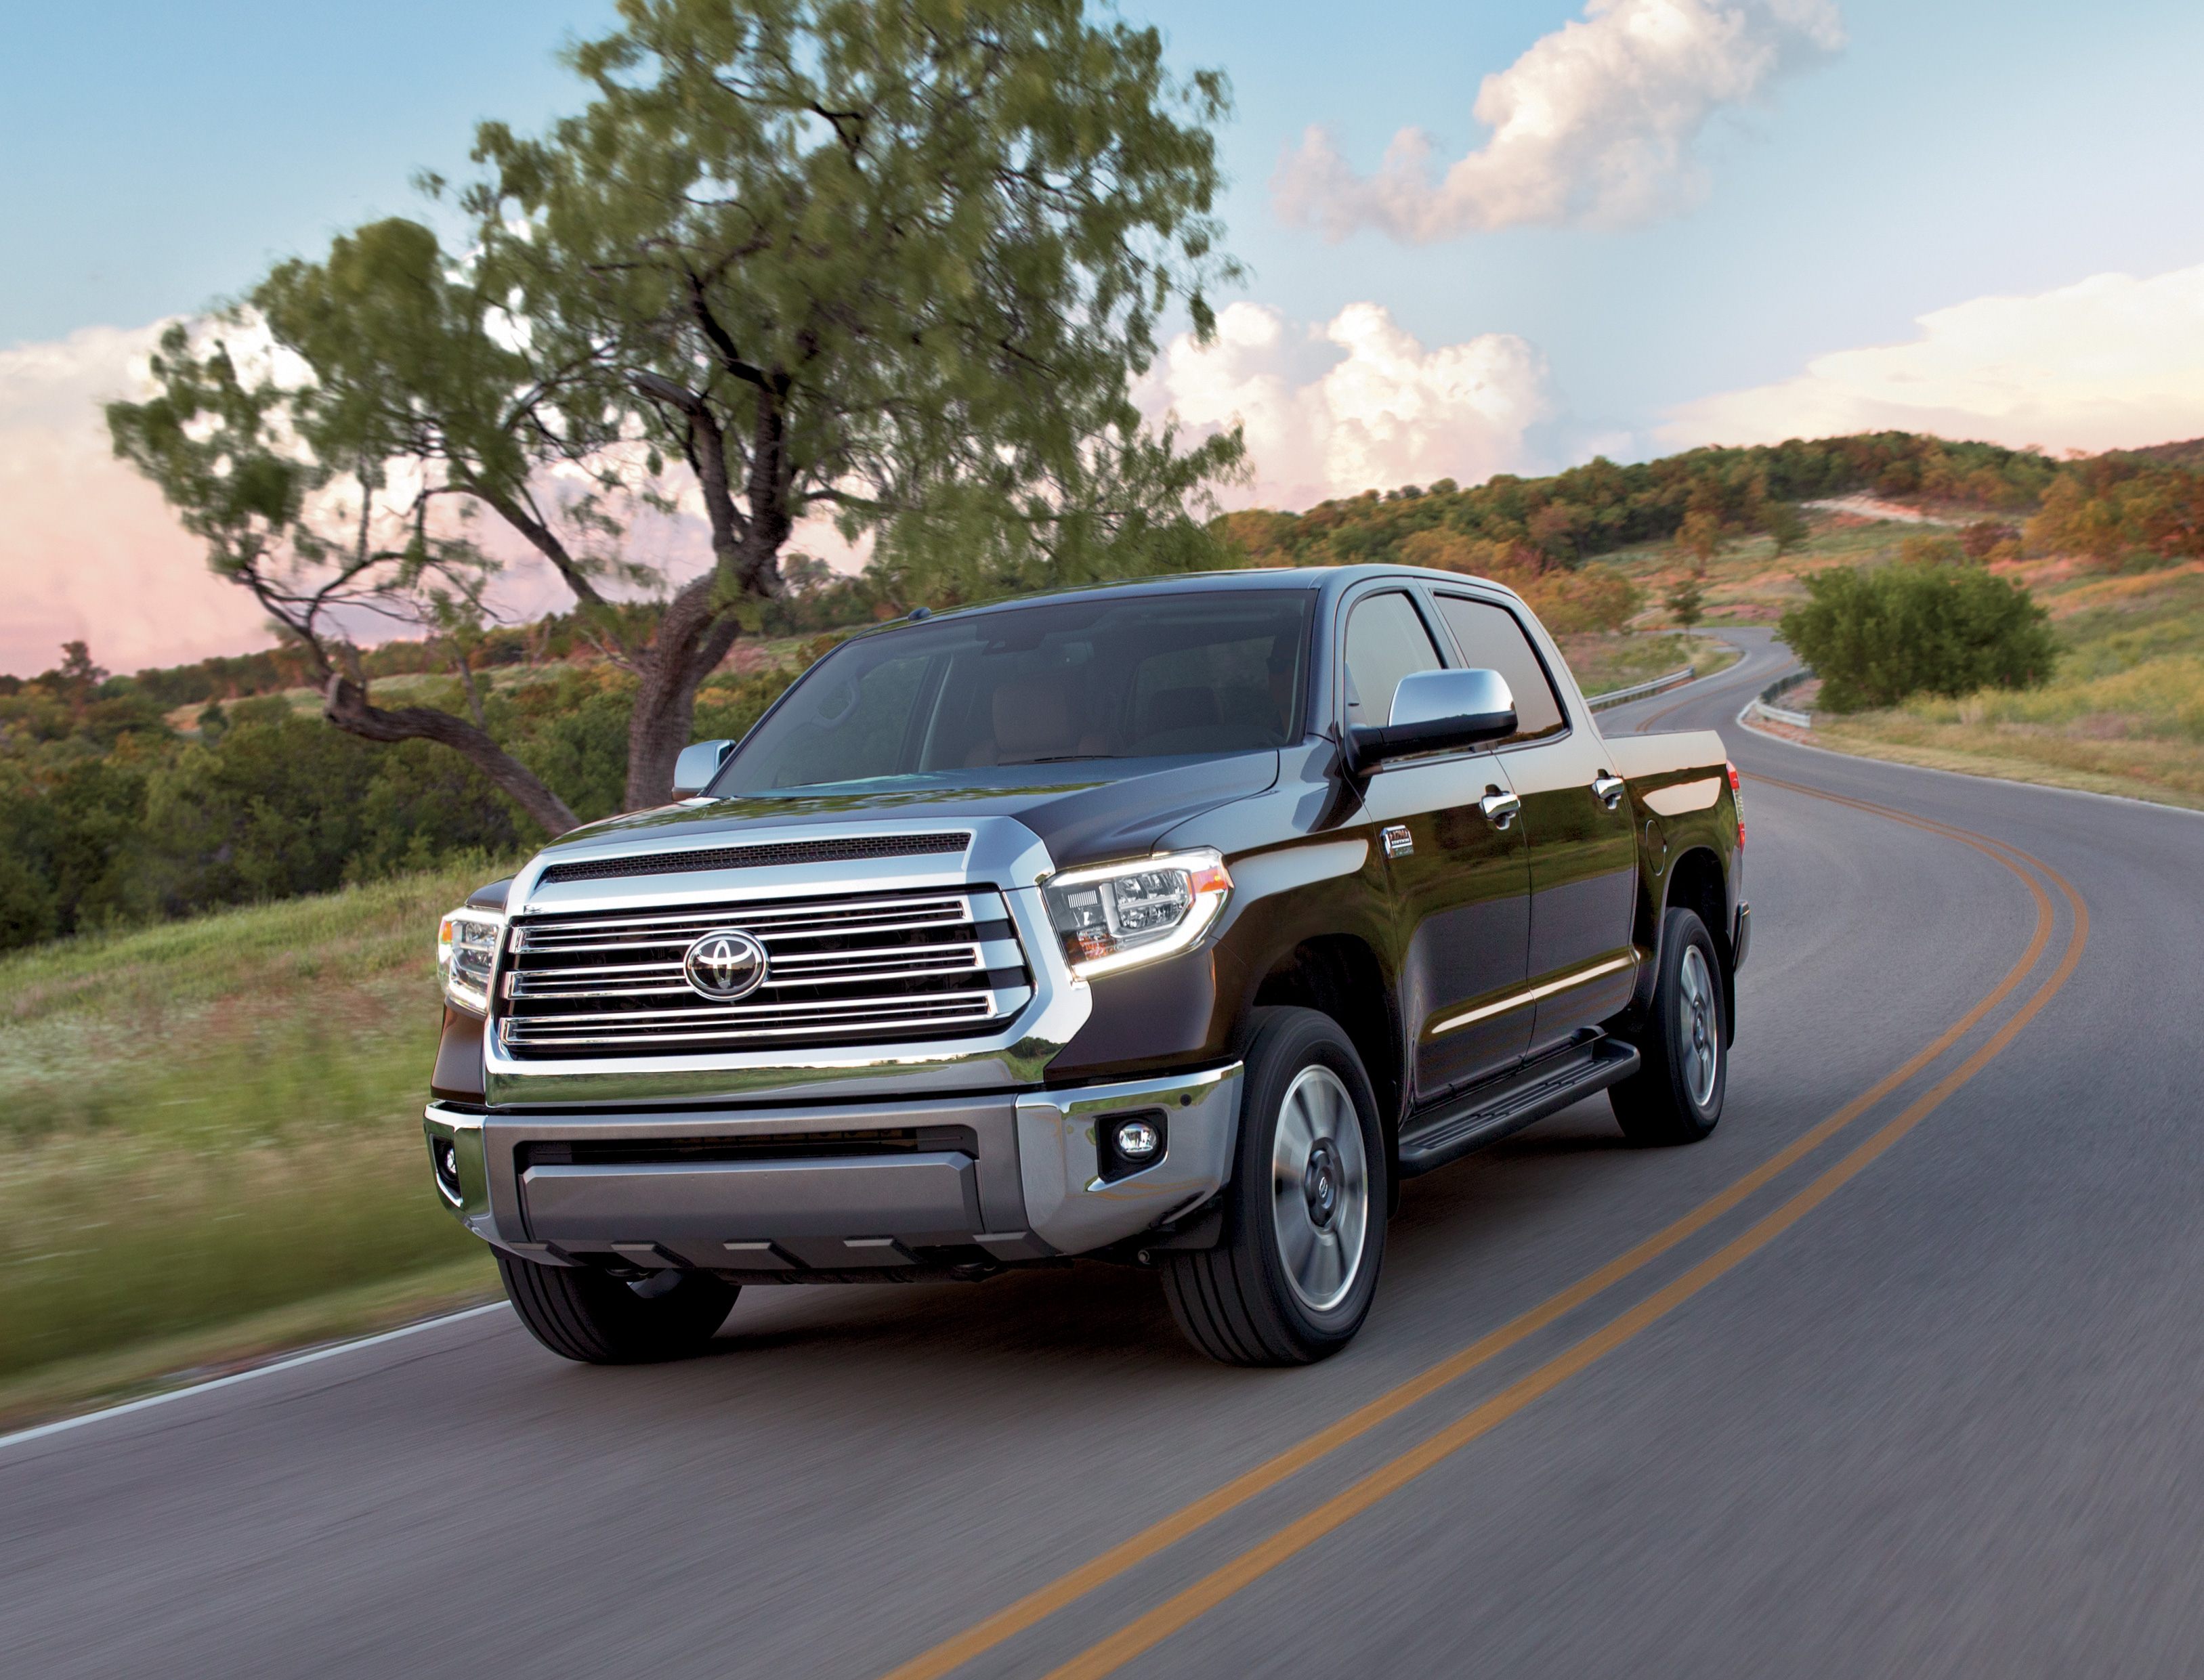 Comment on All-New Toyota Tundra Could Arrive in 2019 with Major Changes by David curtis